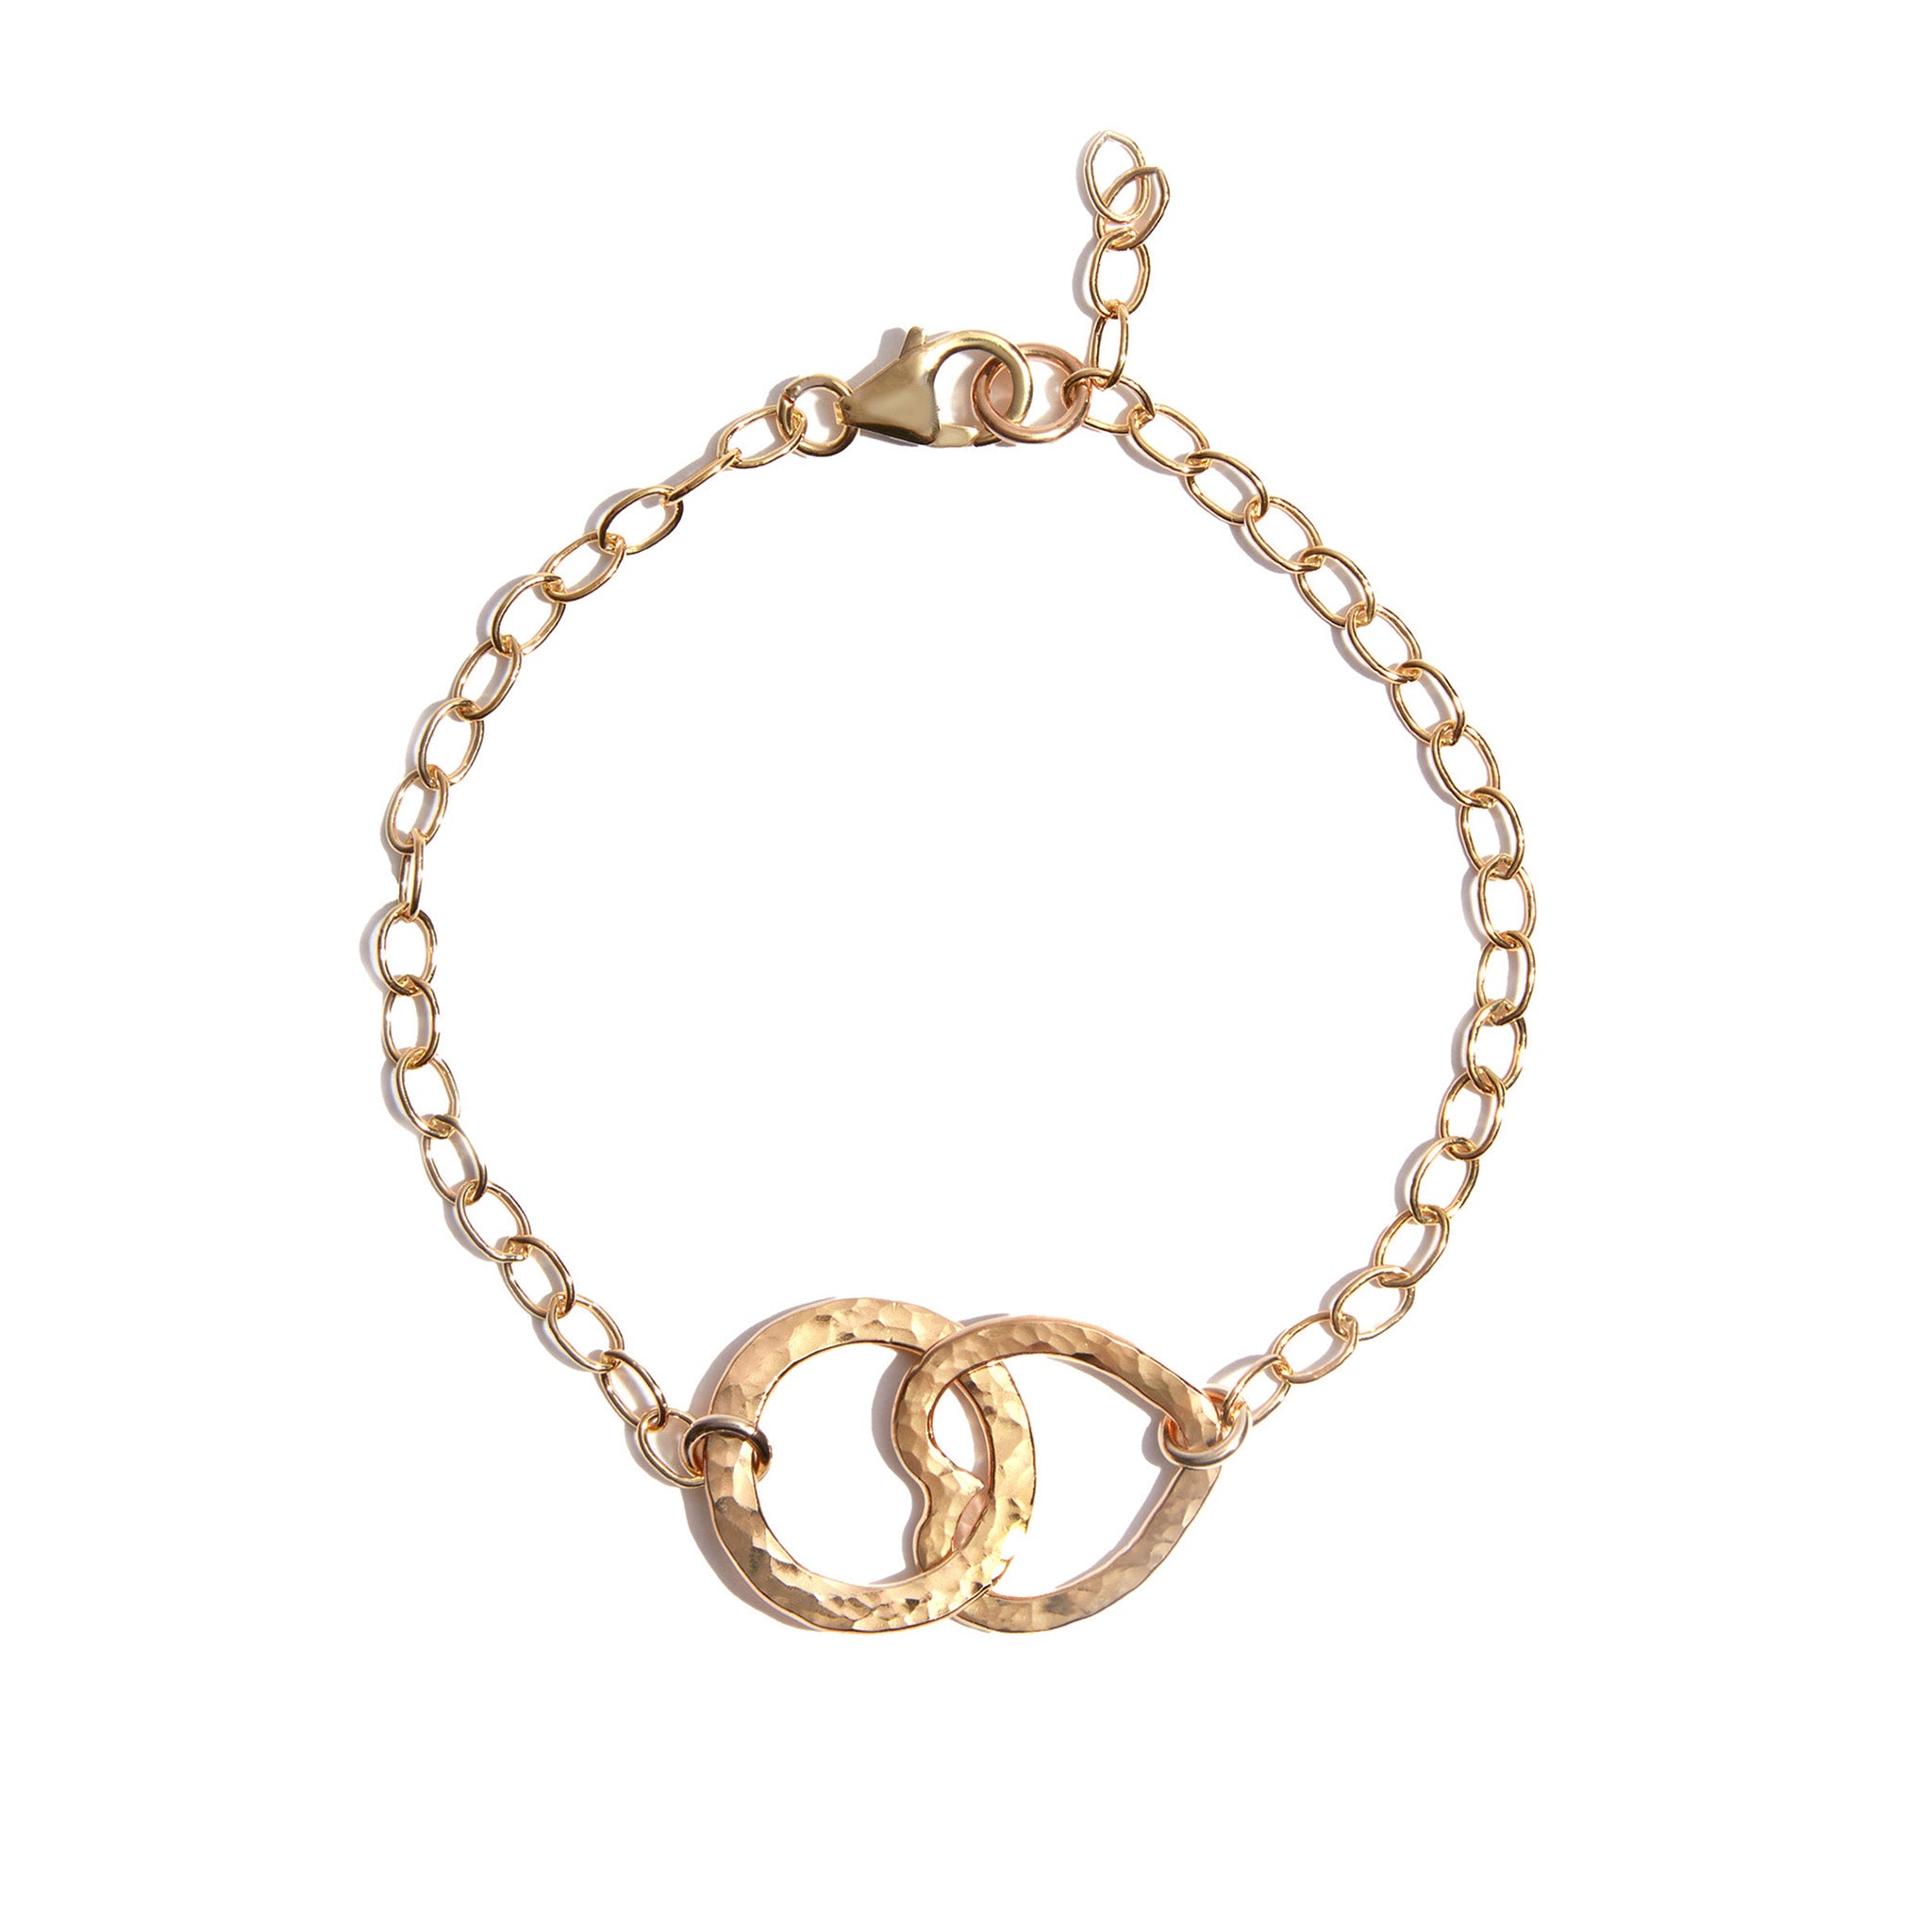 Made from 14ct gold fill our Interlinking Circle Bracelet features two classics Seoidín hammered circle and heart interlinking on a chain bracelet. Full of symbolism, this bracelet makes the perfect gift to give.